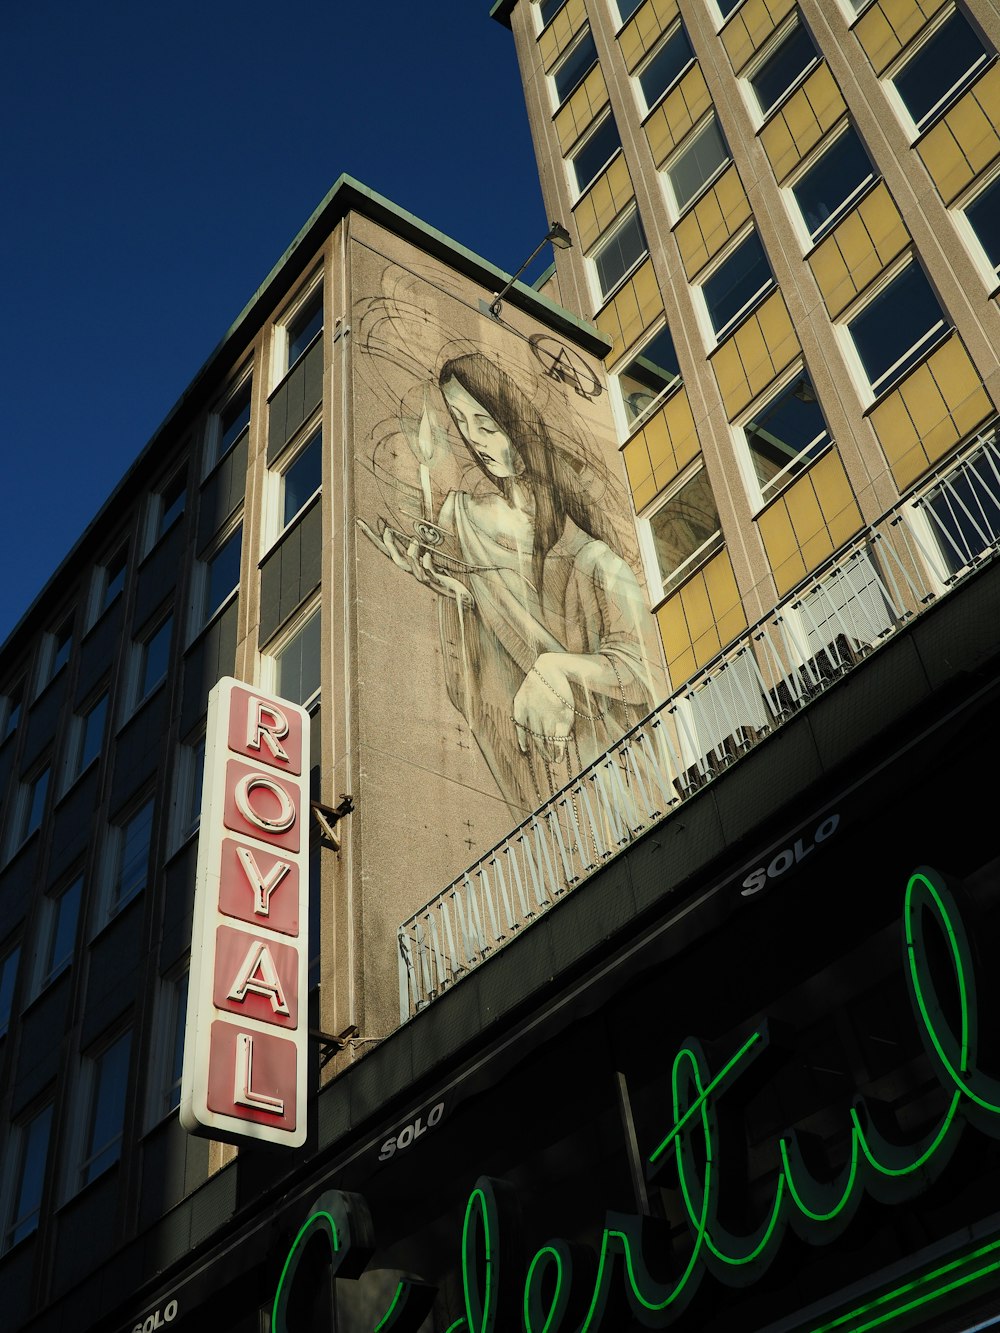 Royal signage mounted on brown concrete multi-storey building